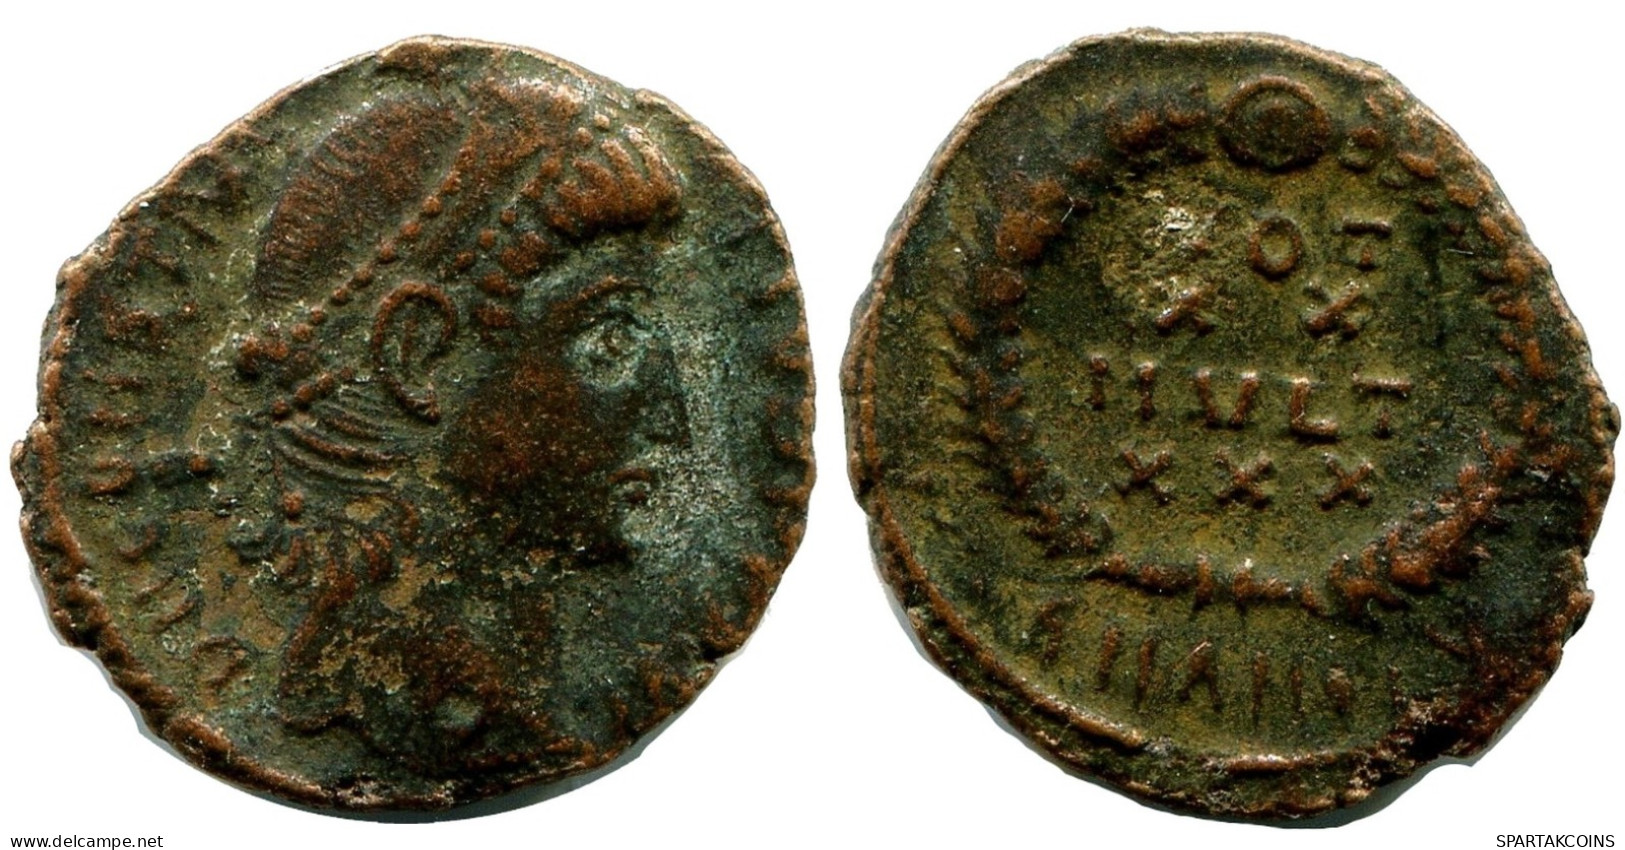 CONSTANTIUS II MINTED IN ANTIOCH FROM THE ROYAL ONTARIO MUSEUM #ANC11256.14.U.A - El Impero Christiano (307 / 363)